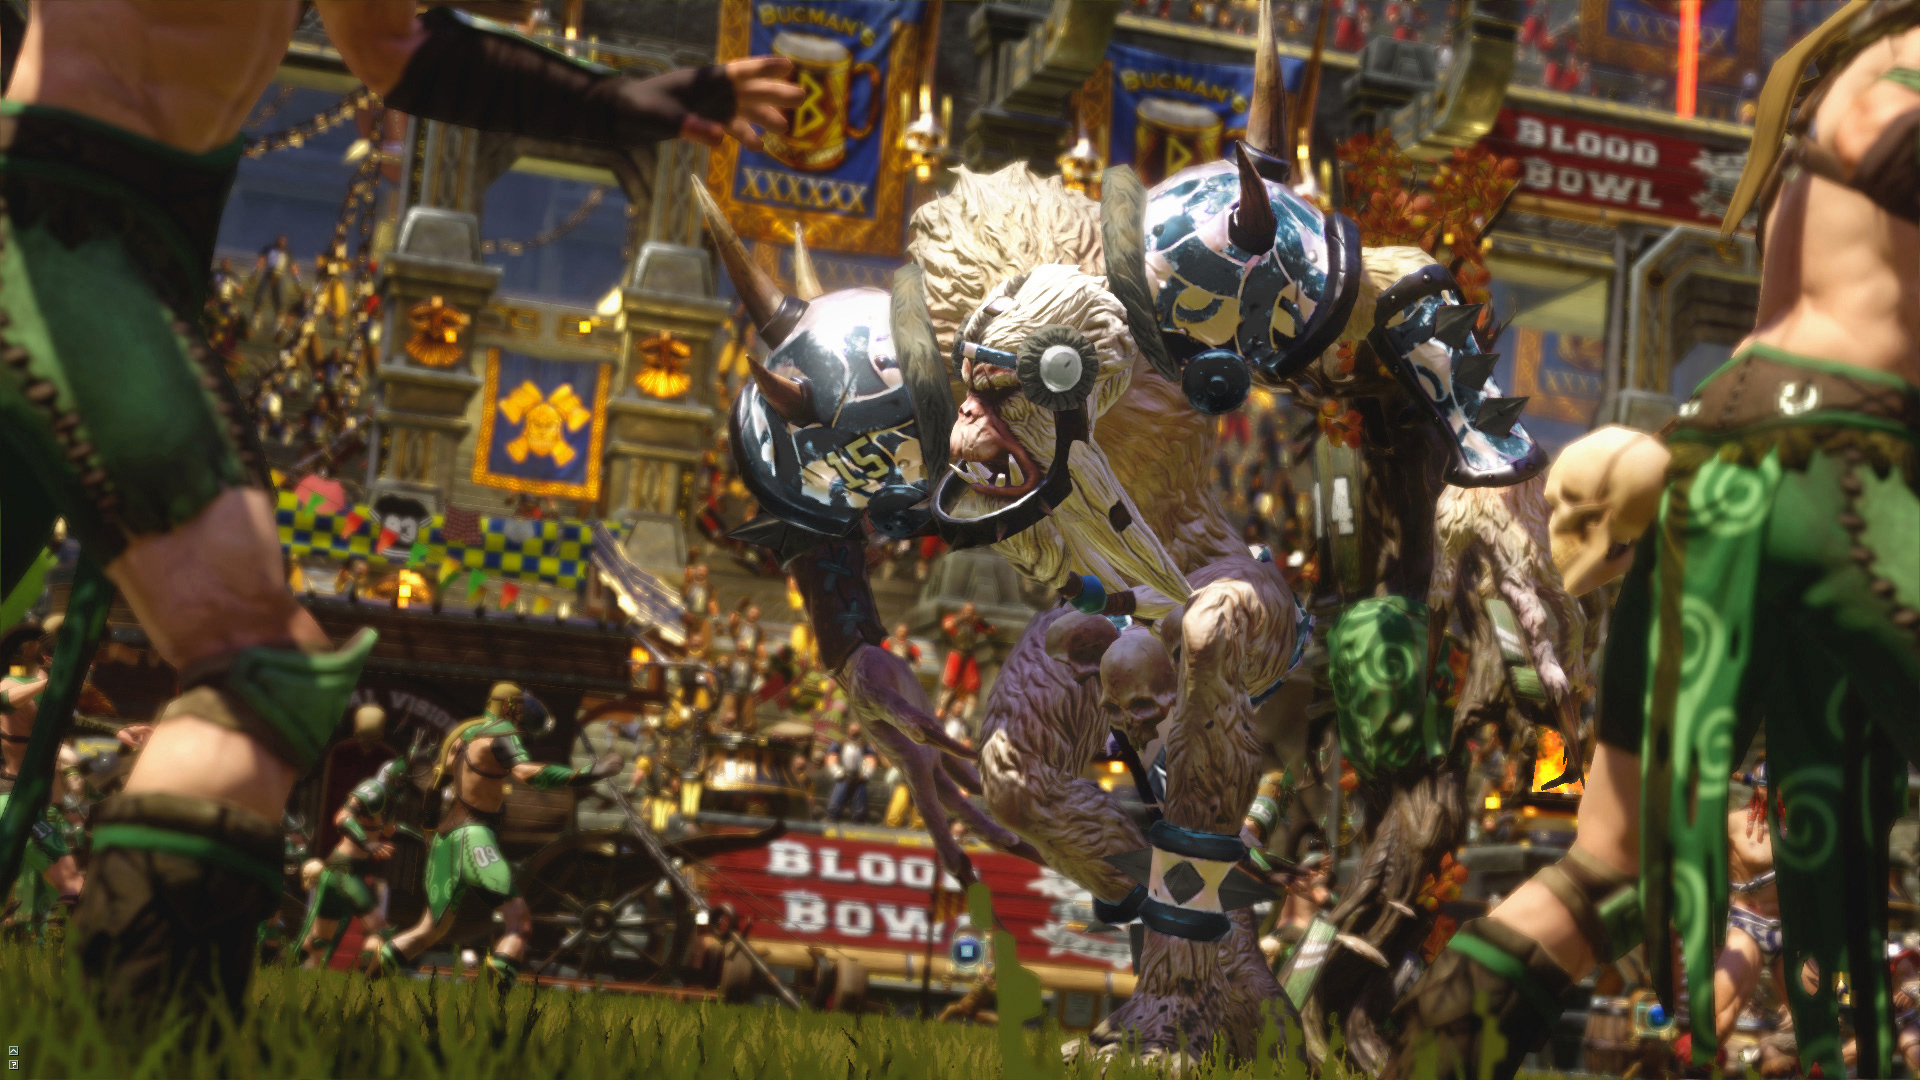 norse blood bowl 2